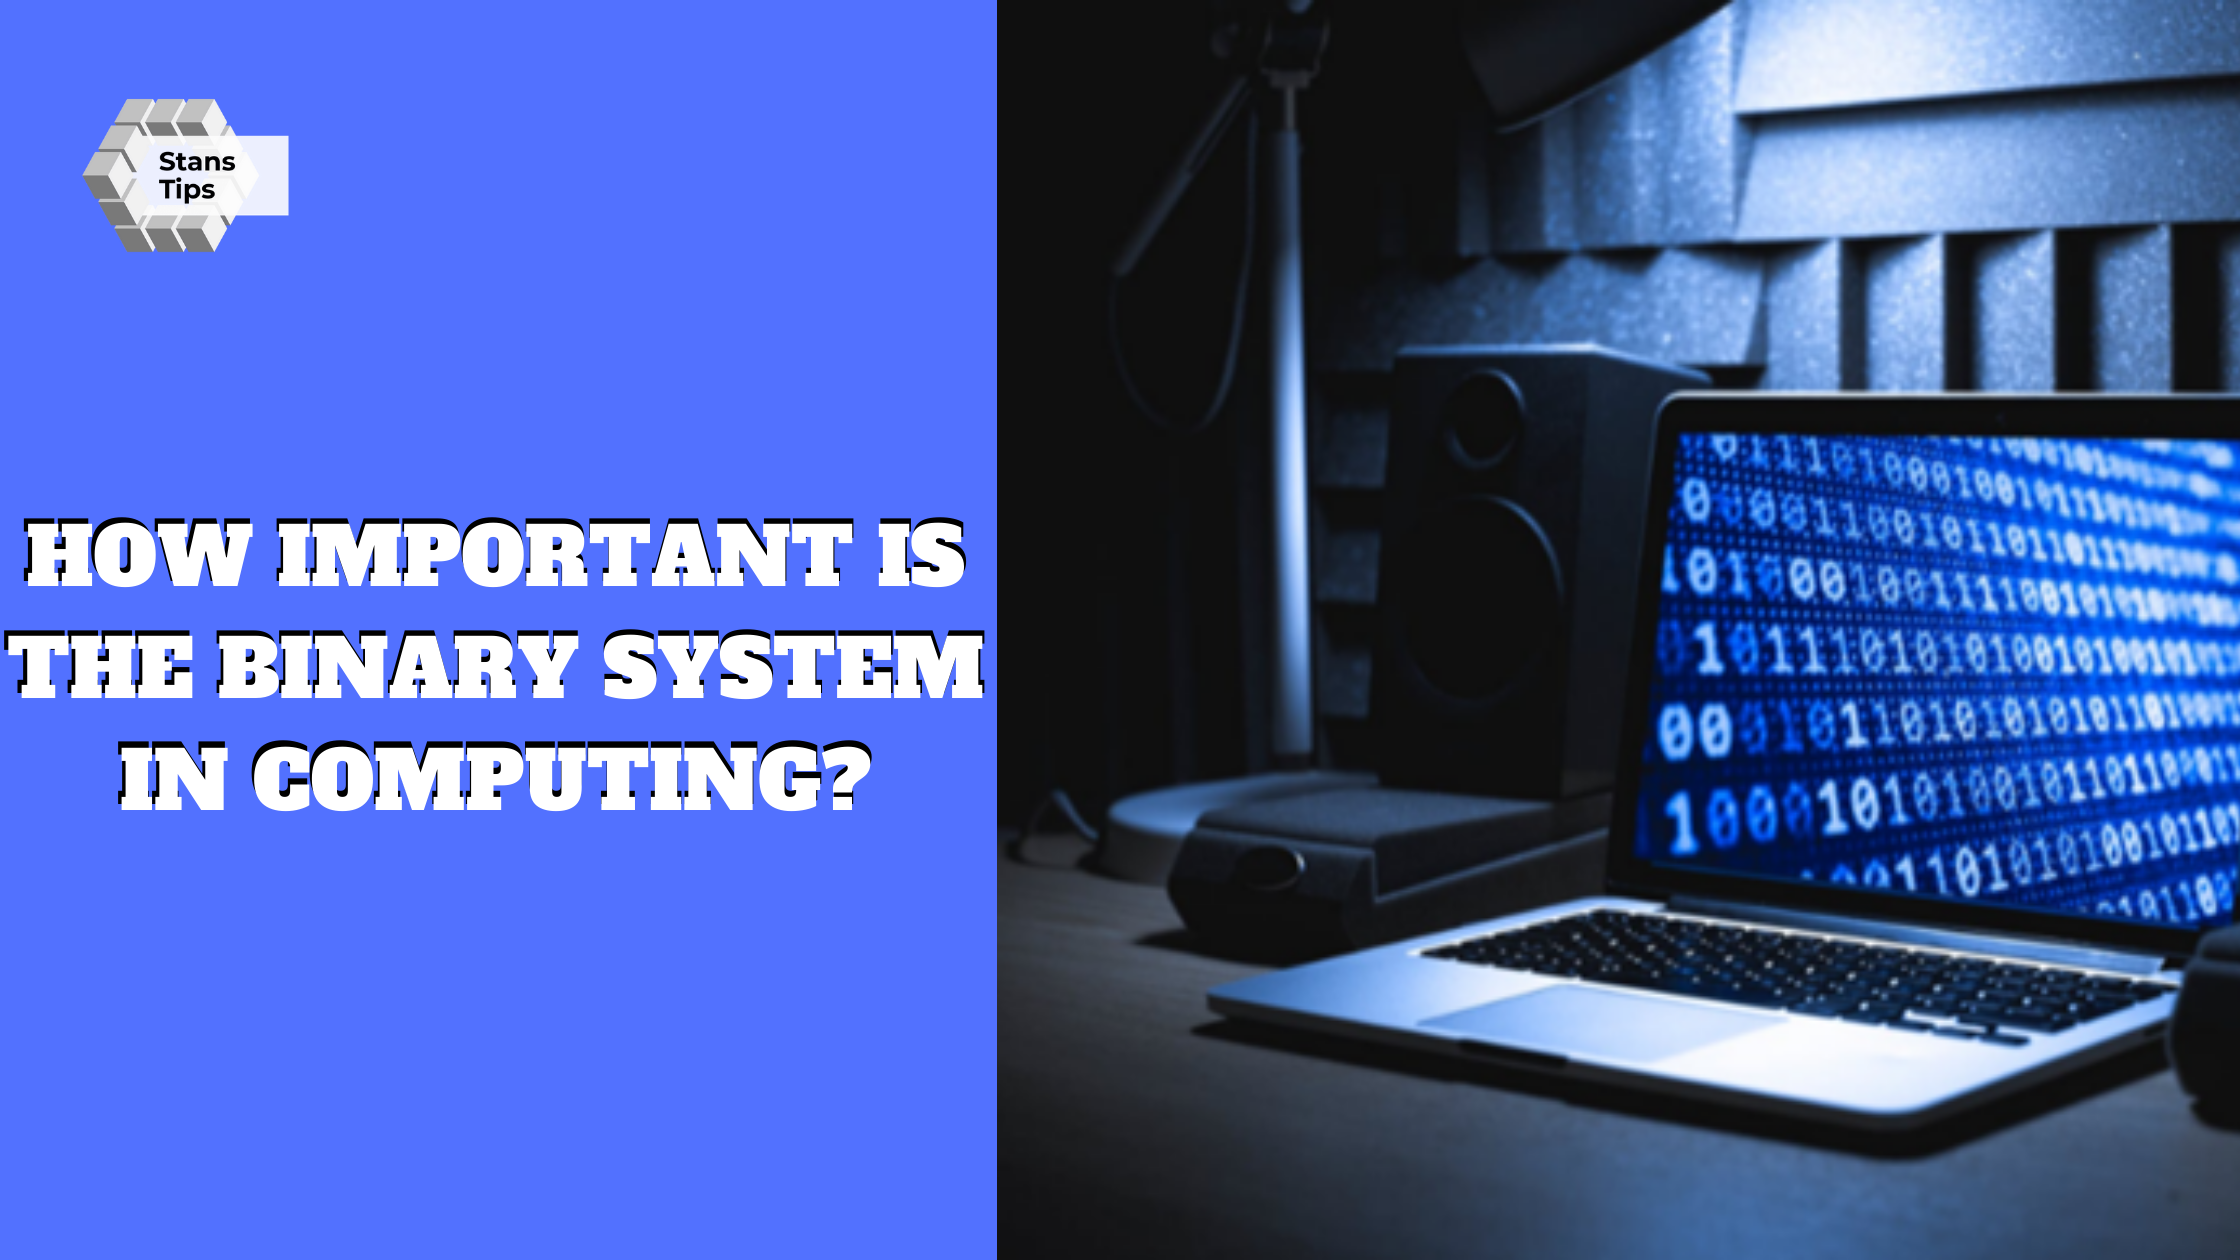 How important is the binary system in computing